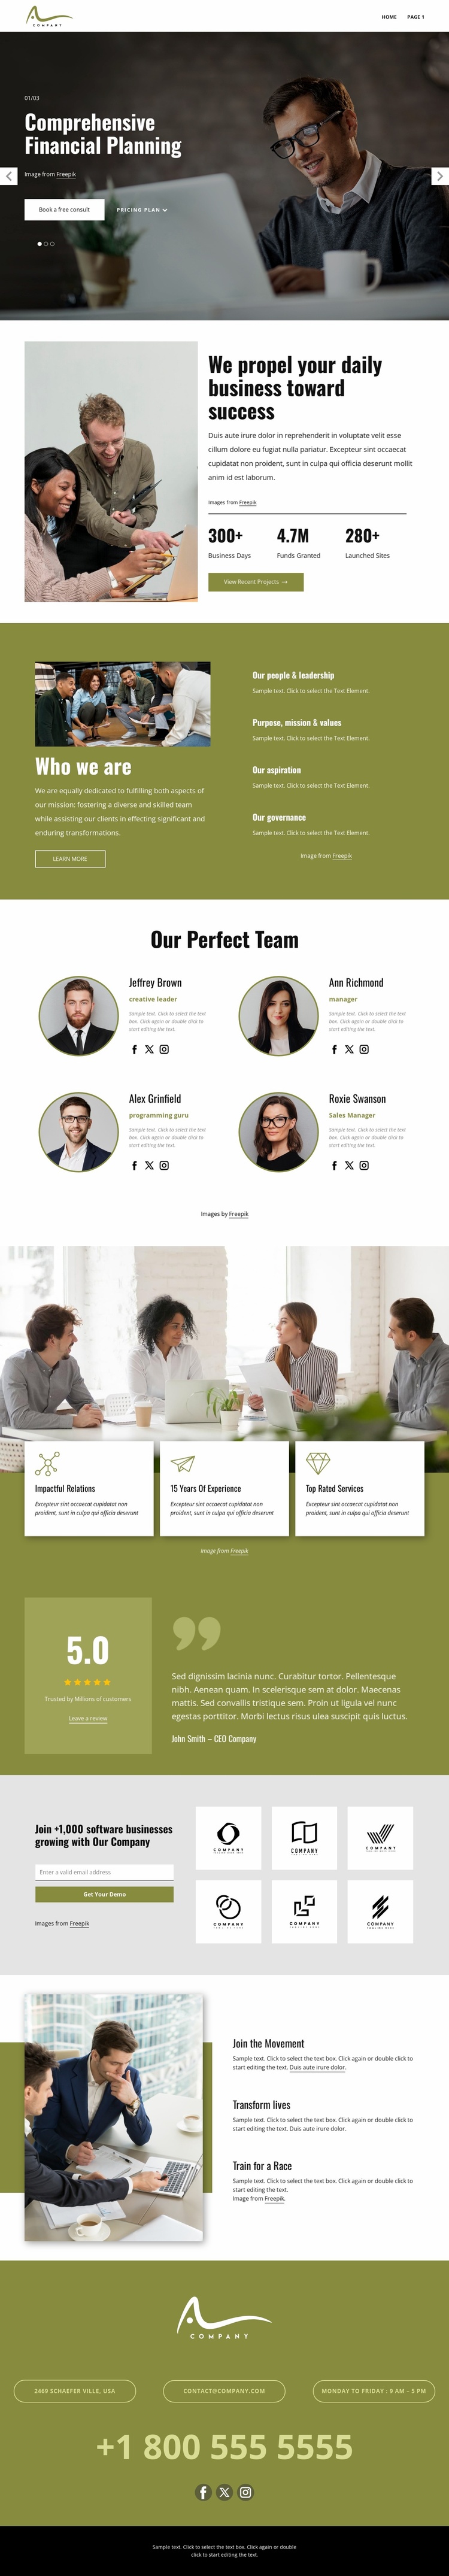 Strategic consulting solutions eCommerce Template